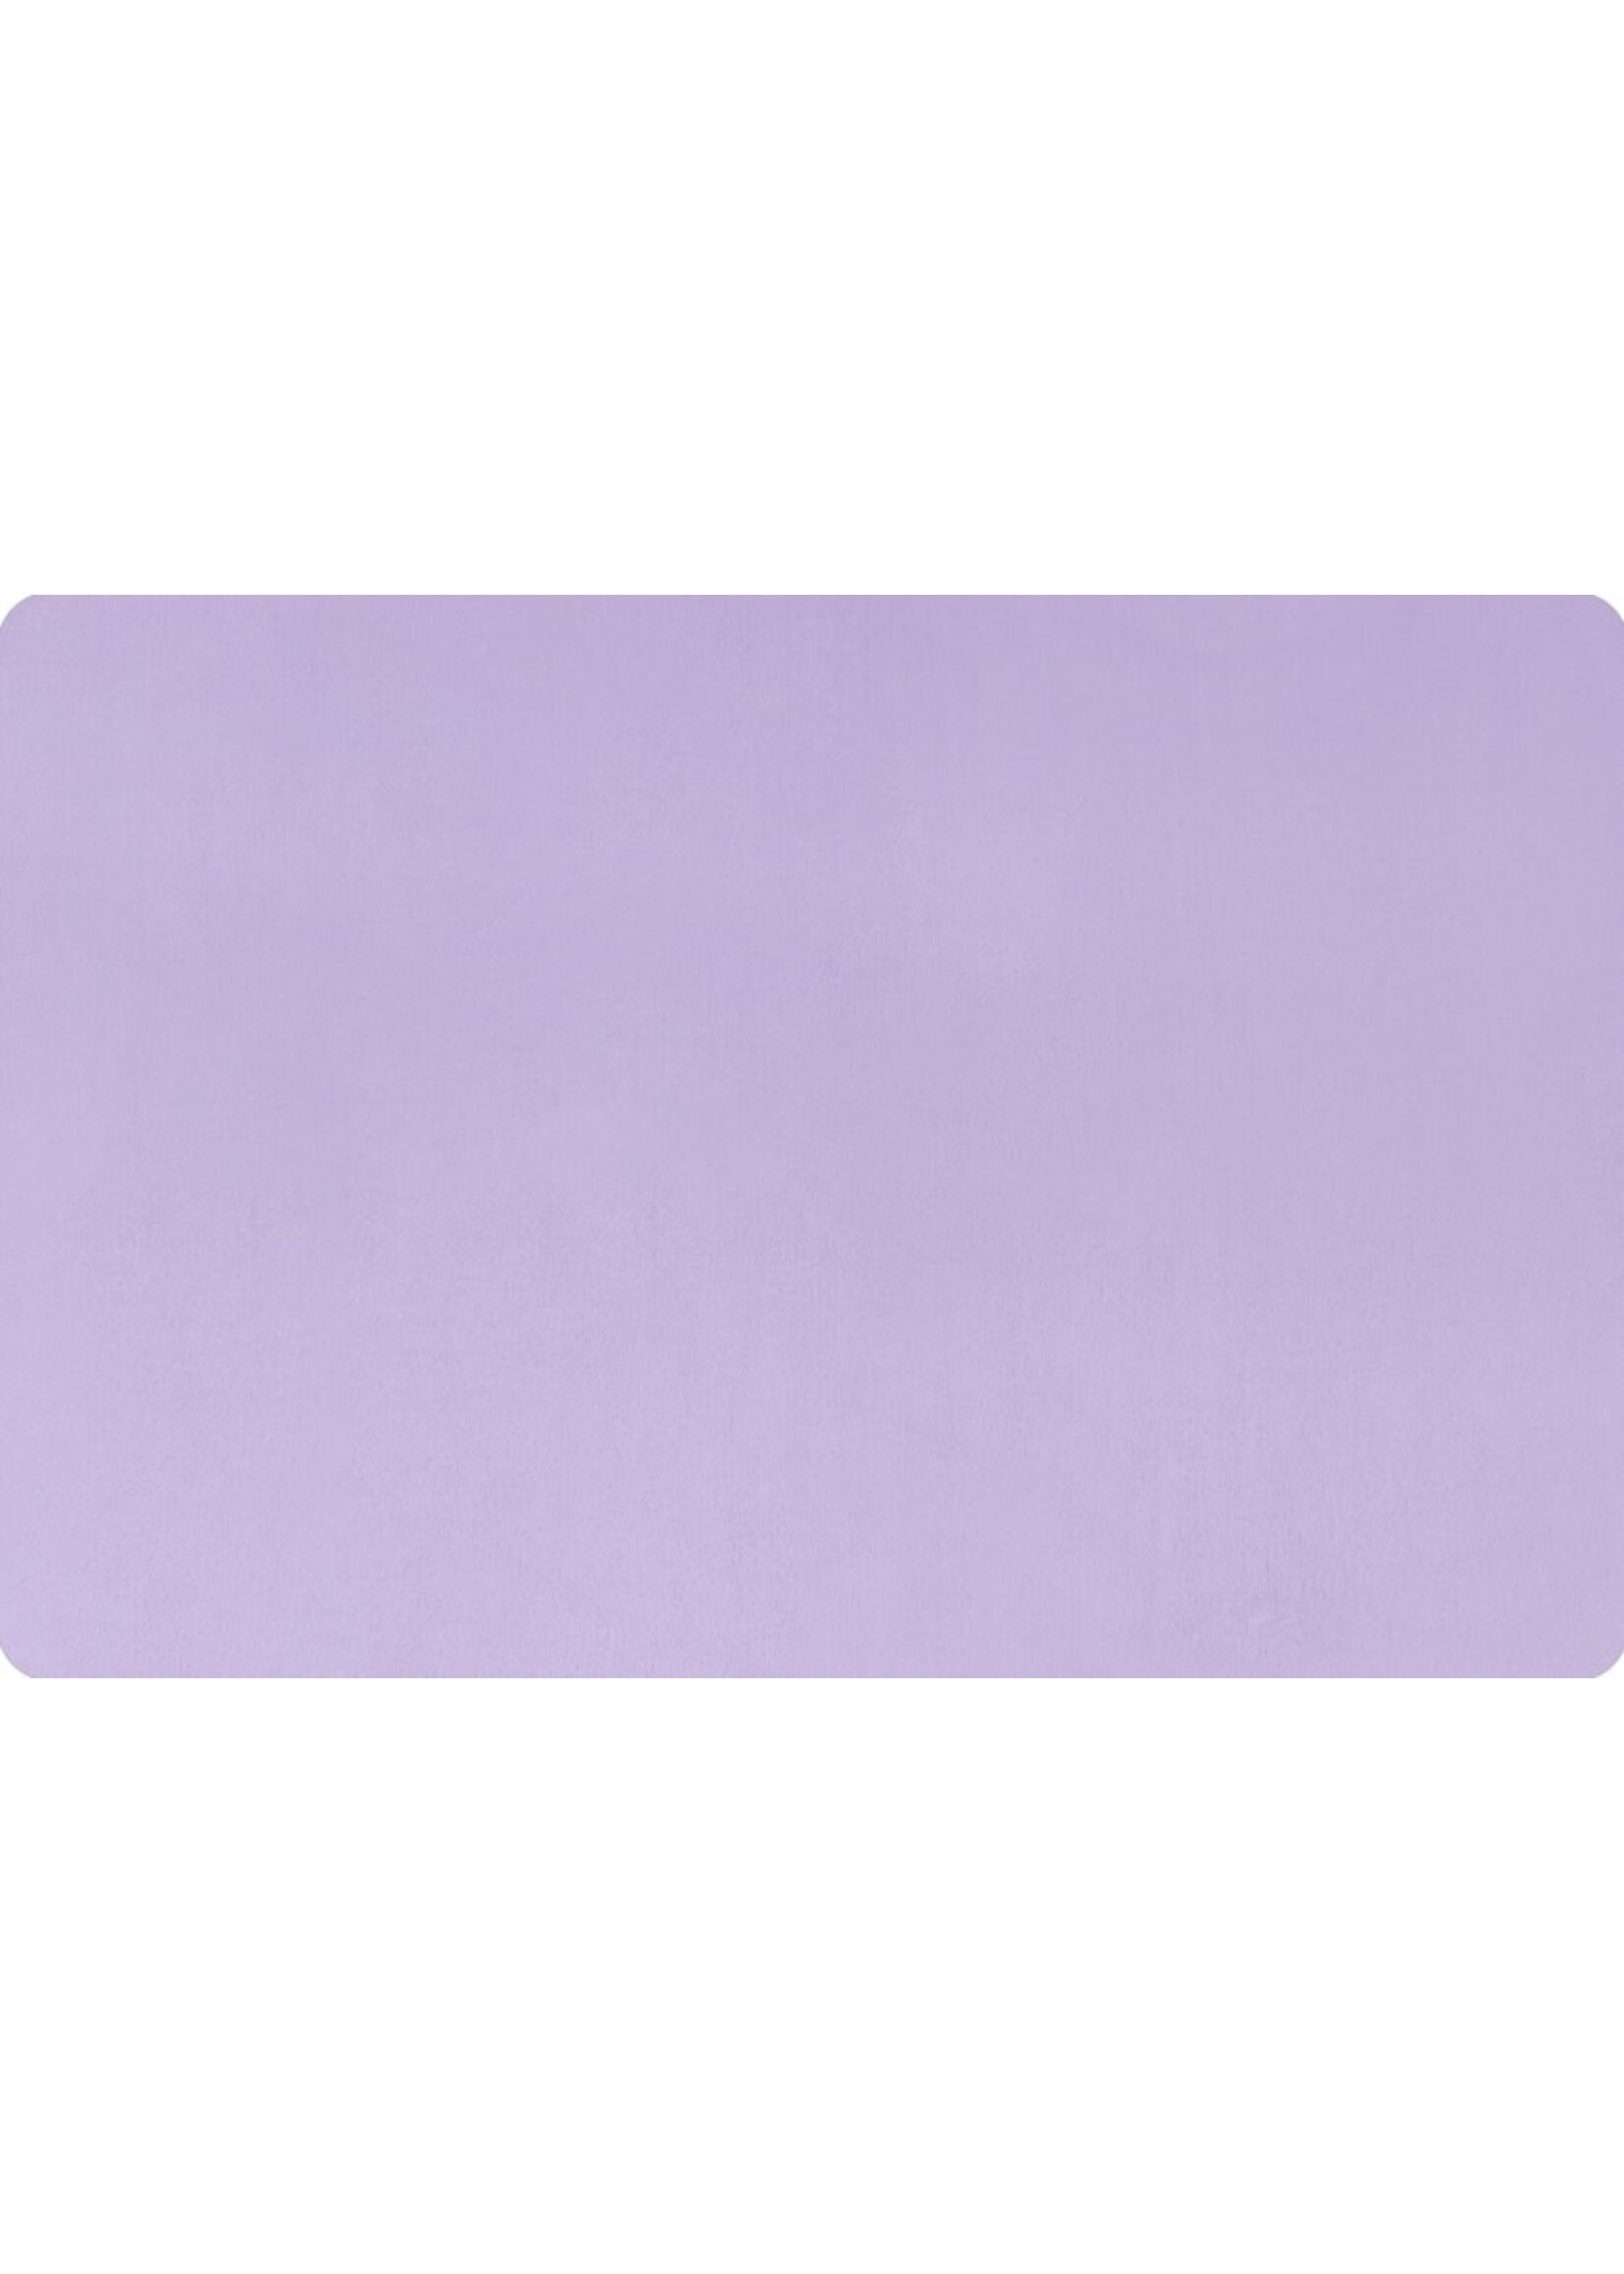 Shannon Fabrics Minky Extra Wide Solid Cuddle3, 90" Lavender, (by the inch)